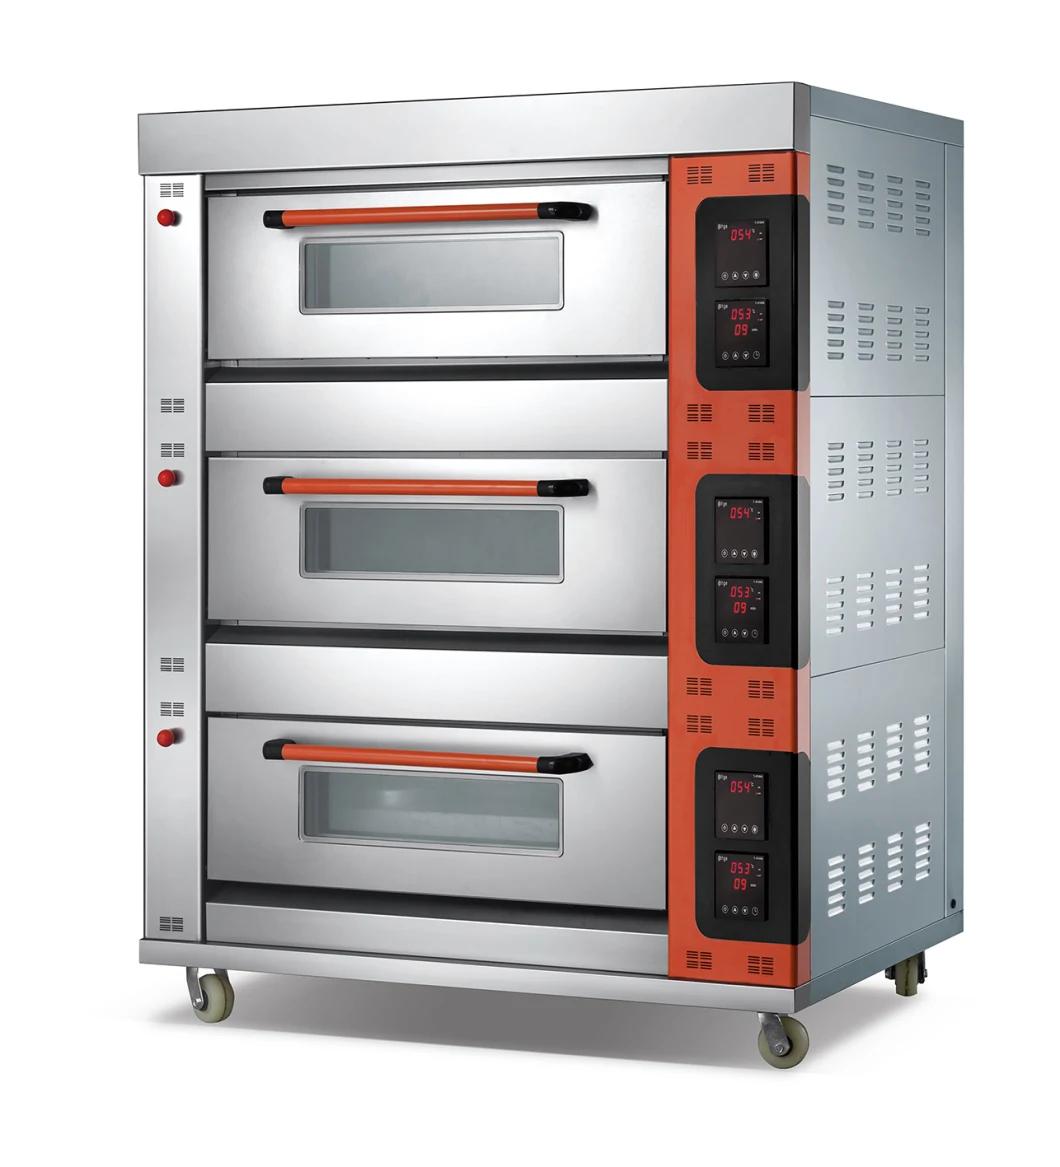 Oven Manufacturer Commercial Pizza Oven Gas Bakery Oven Prices for Sale 3 Deck 6 Trays